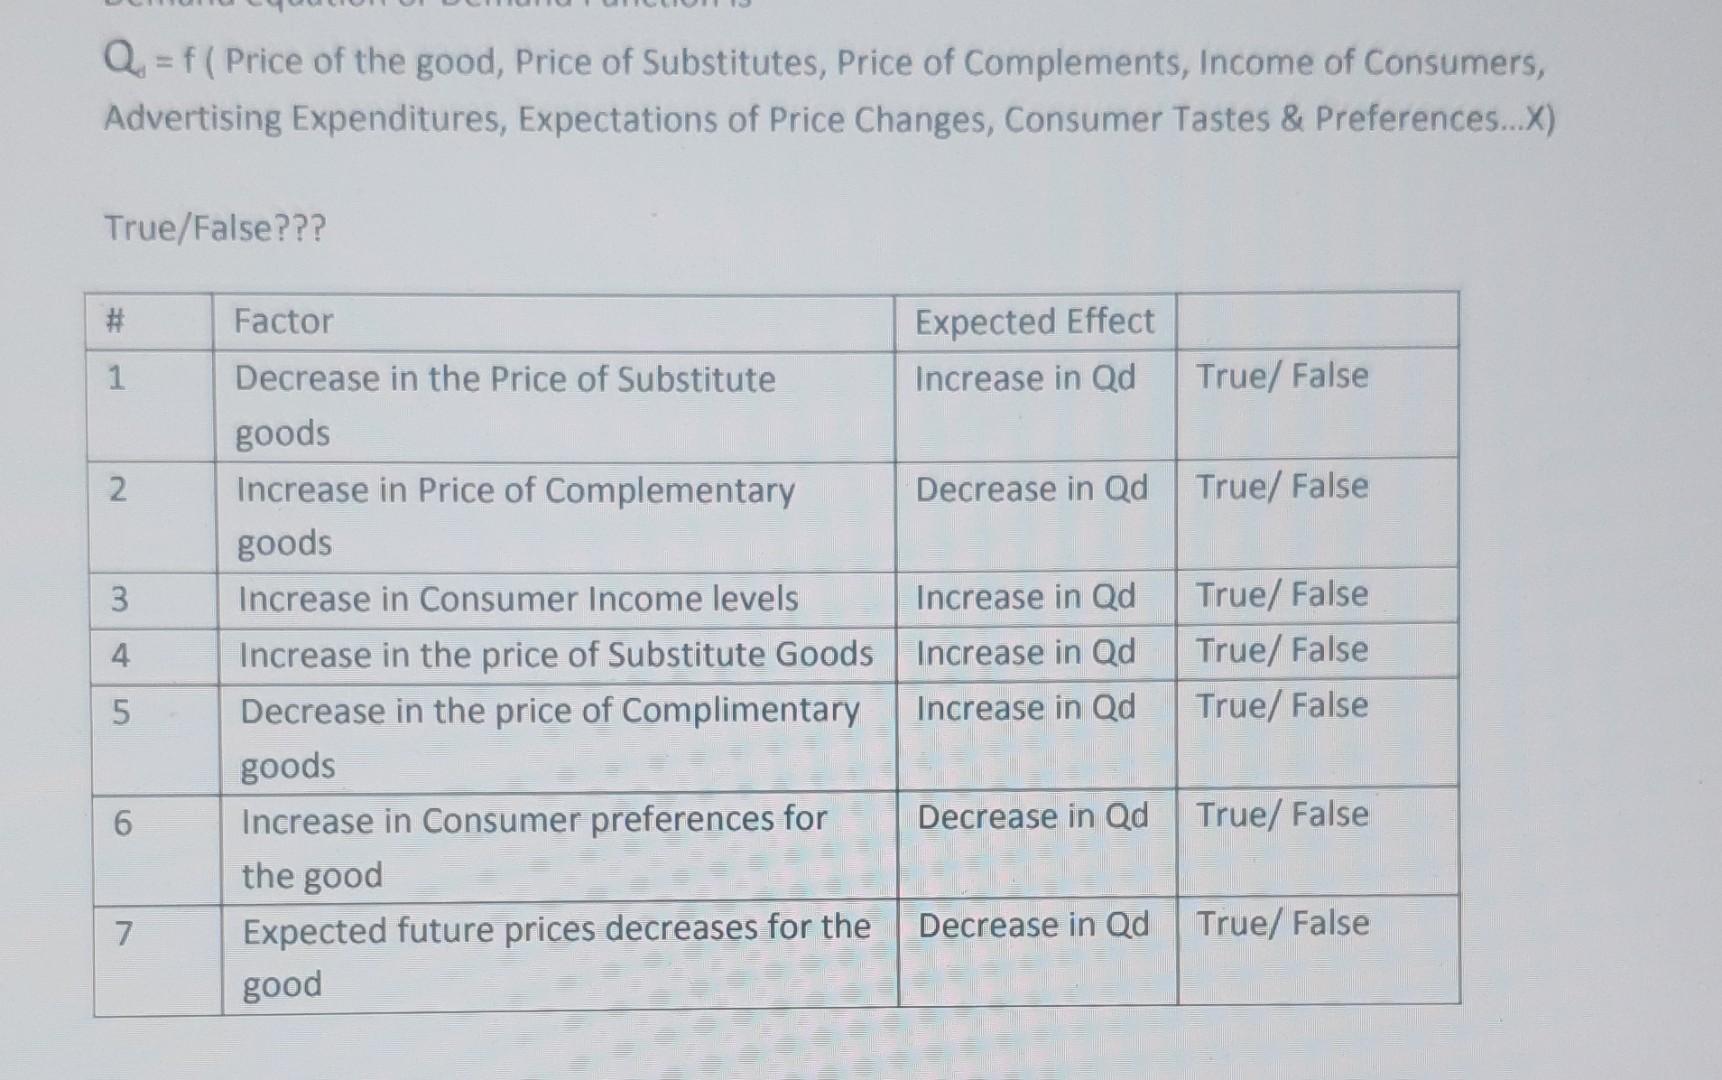 Q = f (Price of the good, Price of Substitutes, Price of Complements, Income of Consumers, Advertising